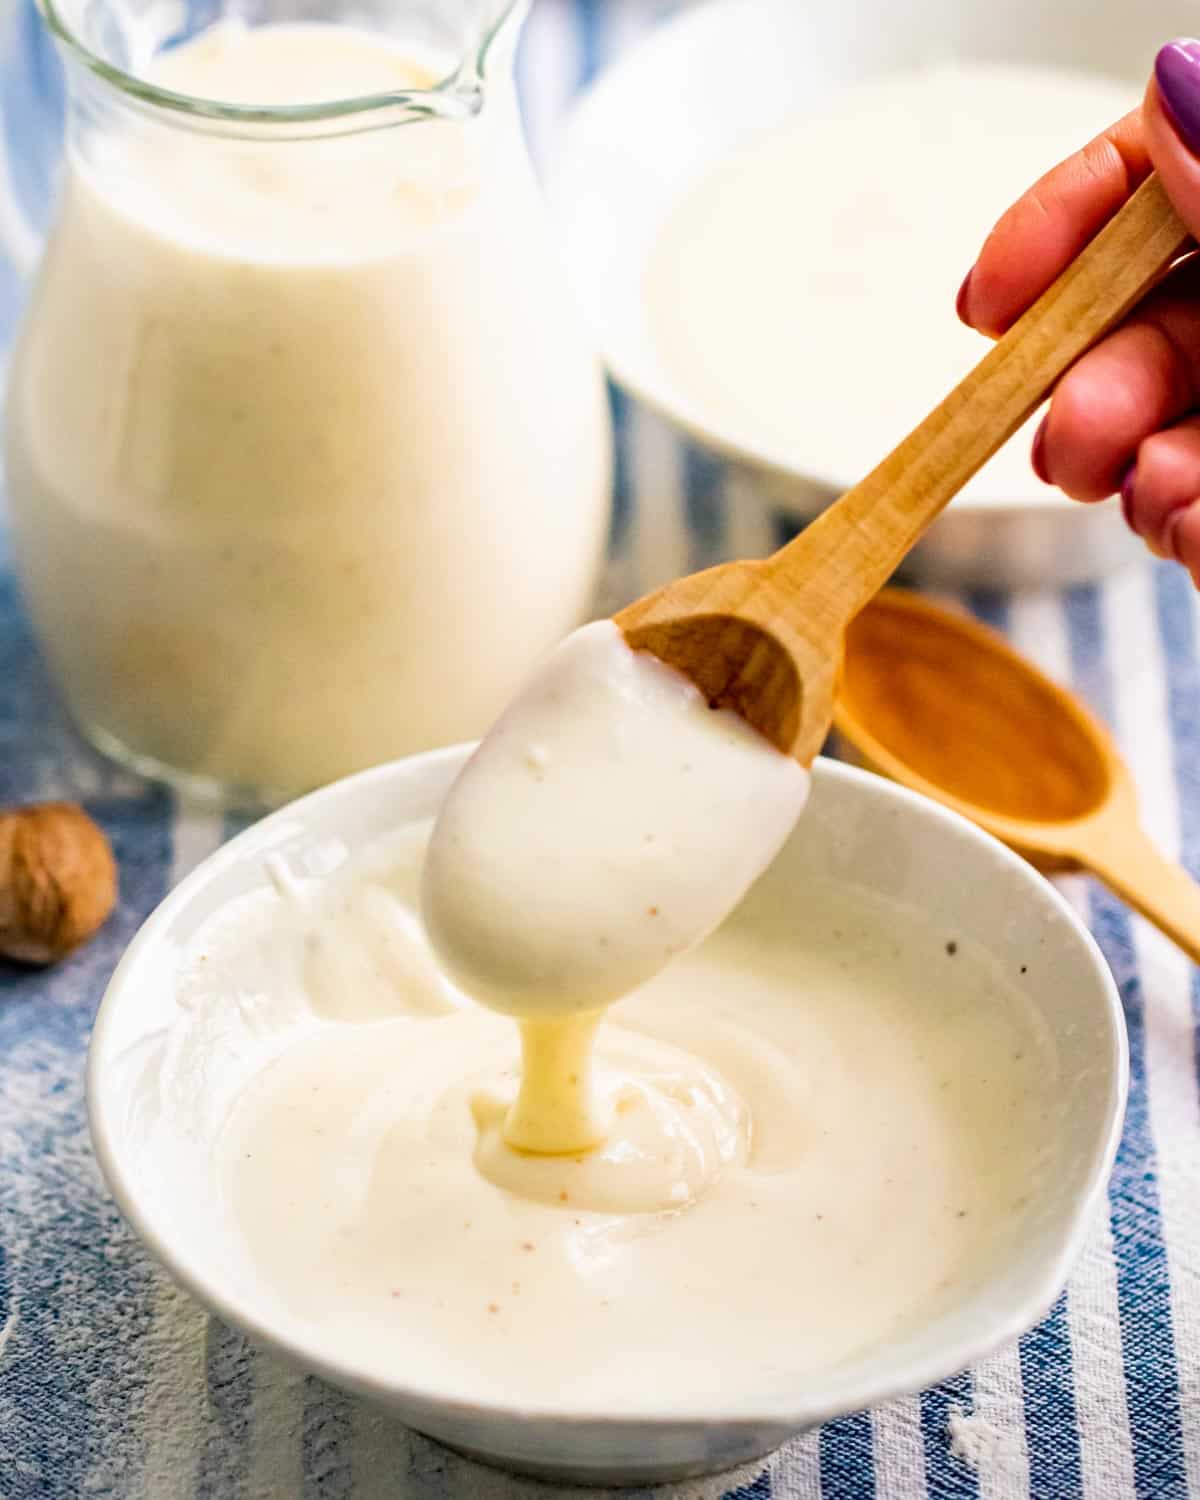 bechamel sauce in a white bowl with a hand taking a spoonful of it